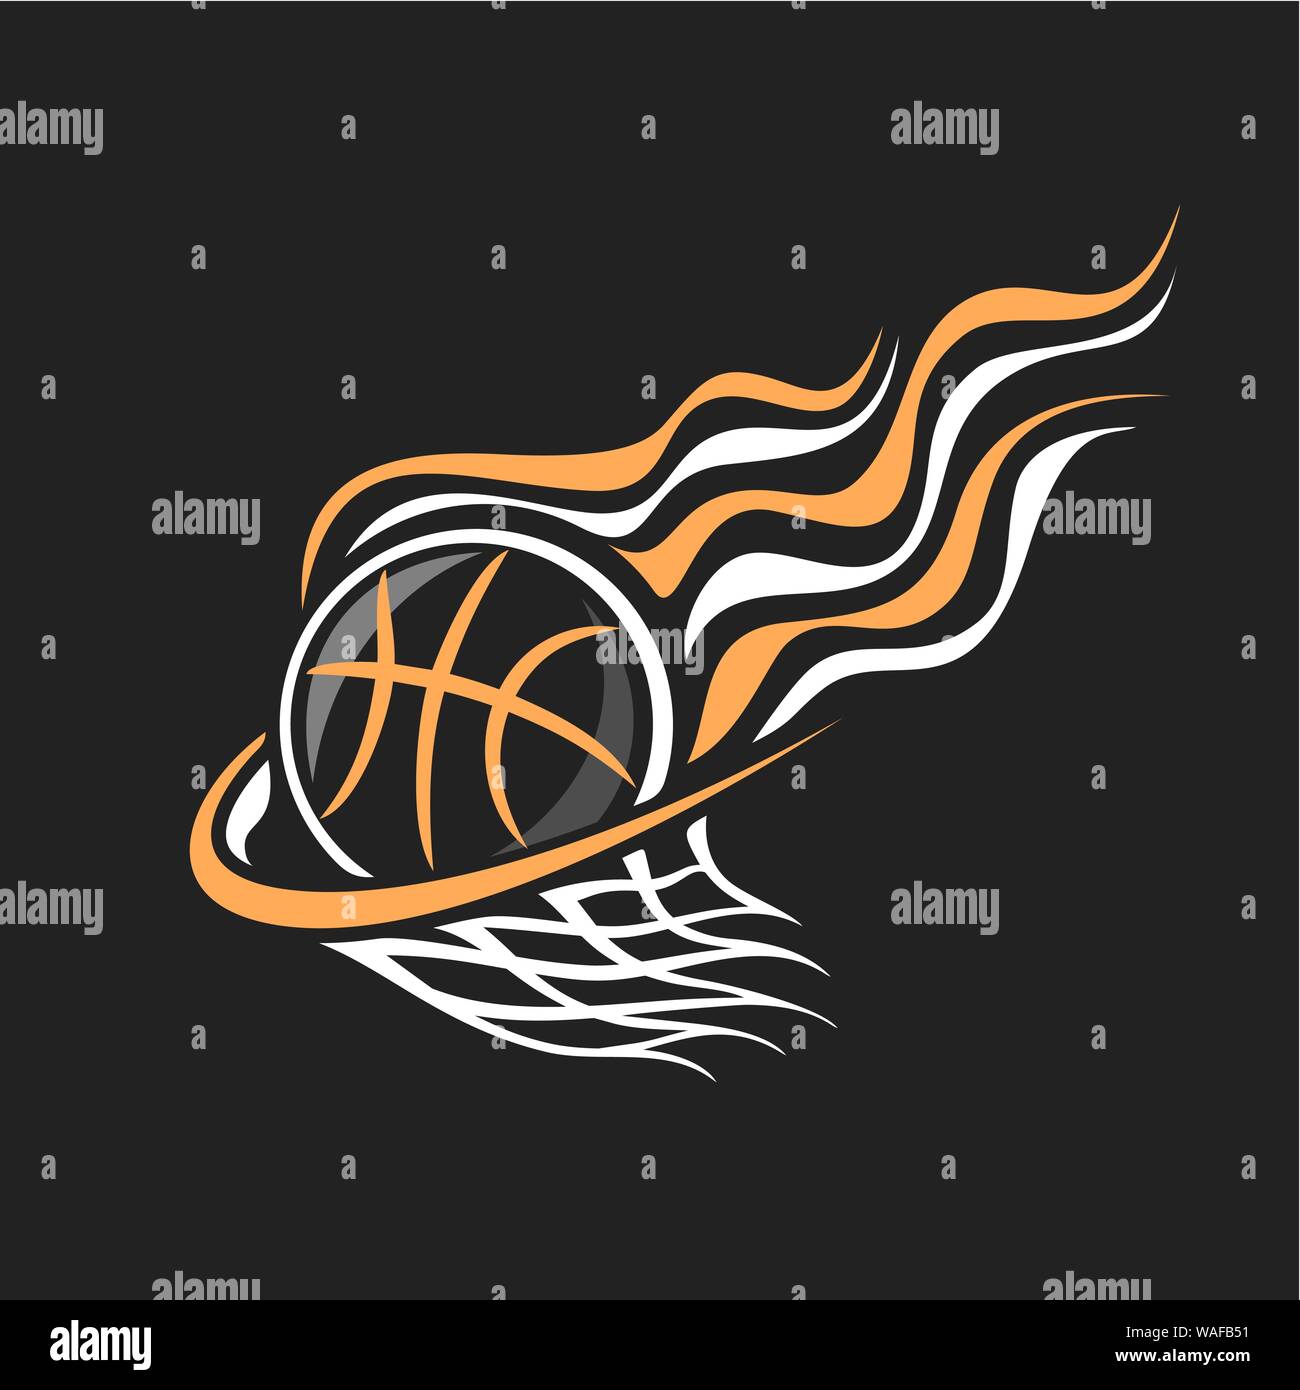 Vector logo for Basketball, decorative badge with burning basketball ball flying on trajectory in basket with net on black background, sports chalk sk Stock Vector